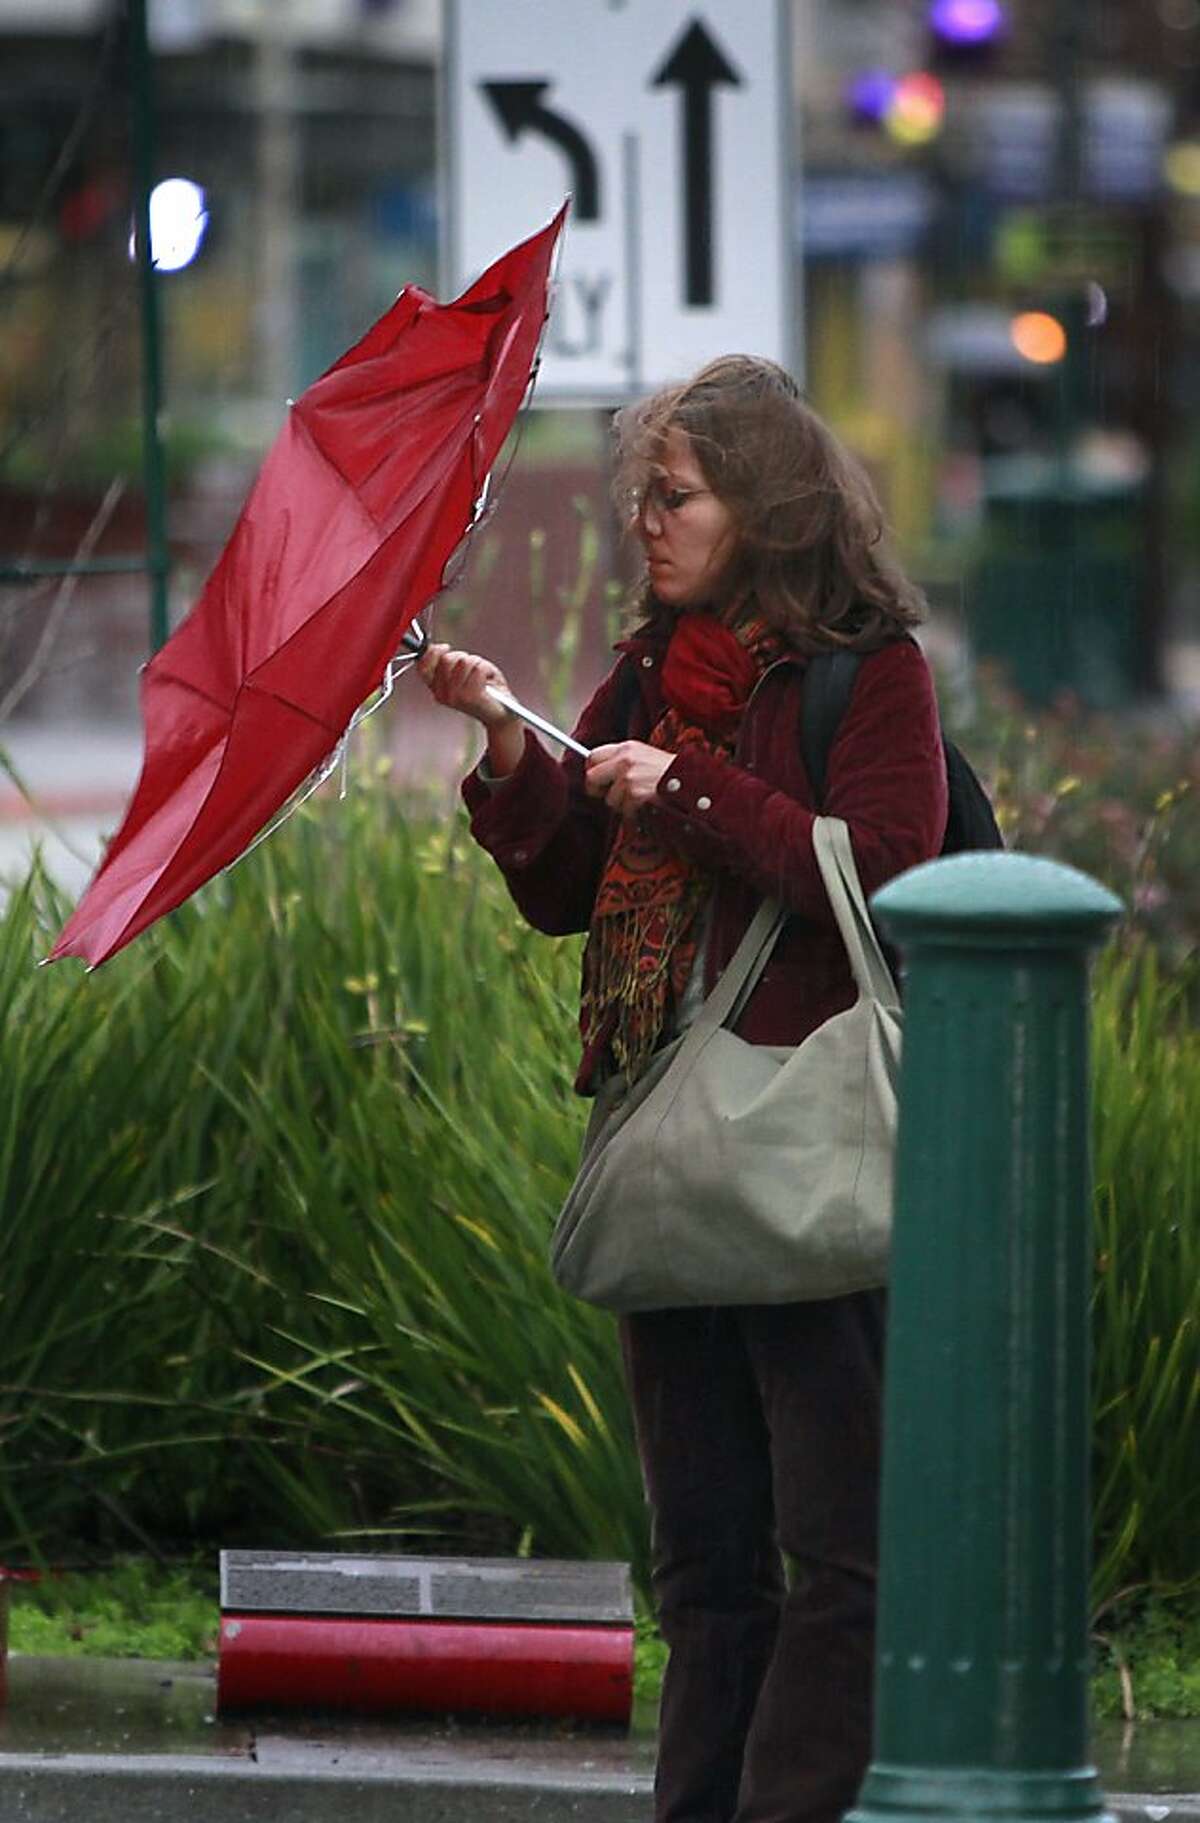 A pedestrian fights a losing battle against the wind in Berkeley, Calif. on Wednesday, Nov. 28, 2012.